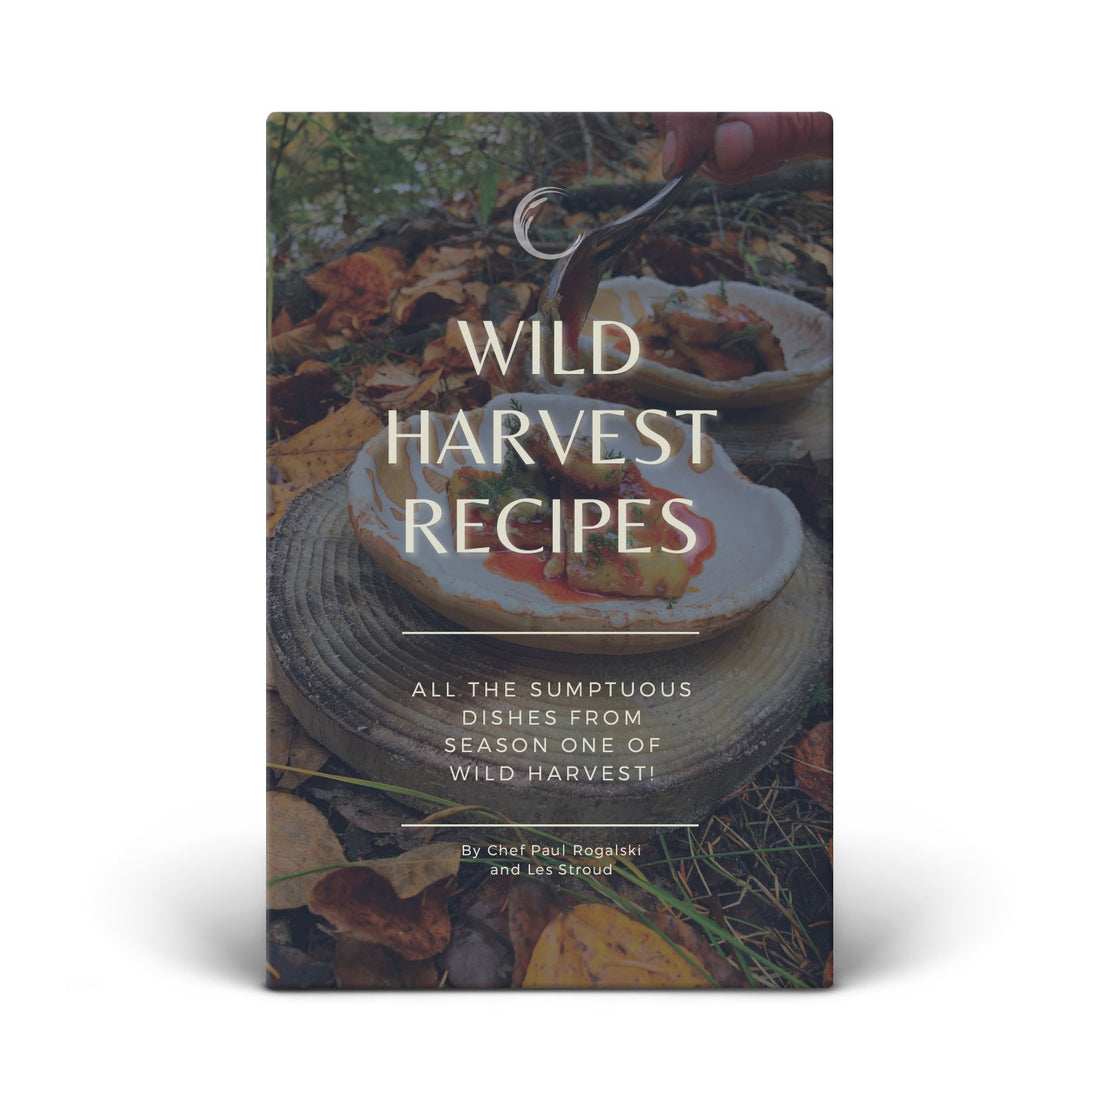 Survivorman - Wild Harvest Recipes: All the sumptuous dishes from Season One of Wild Harvest Book